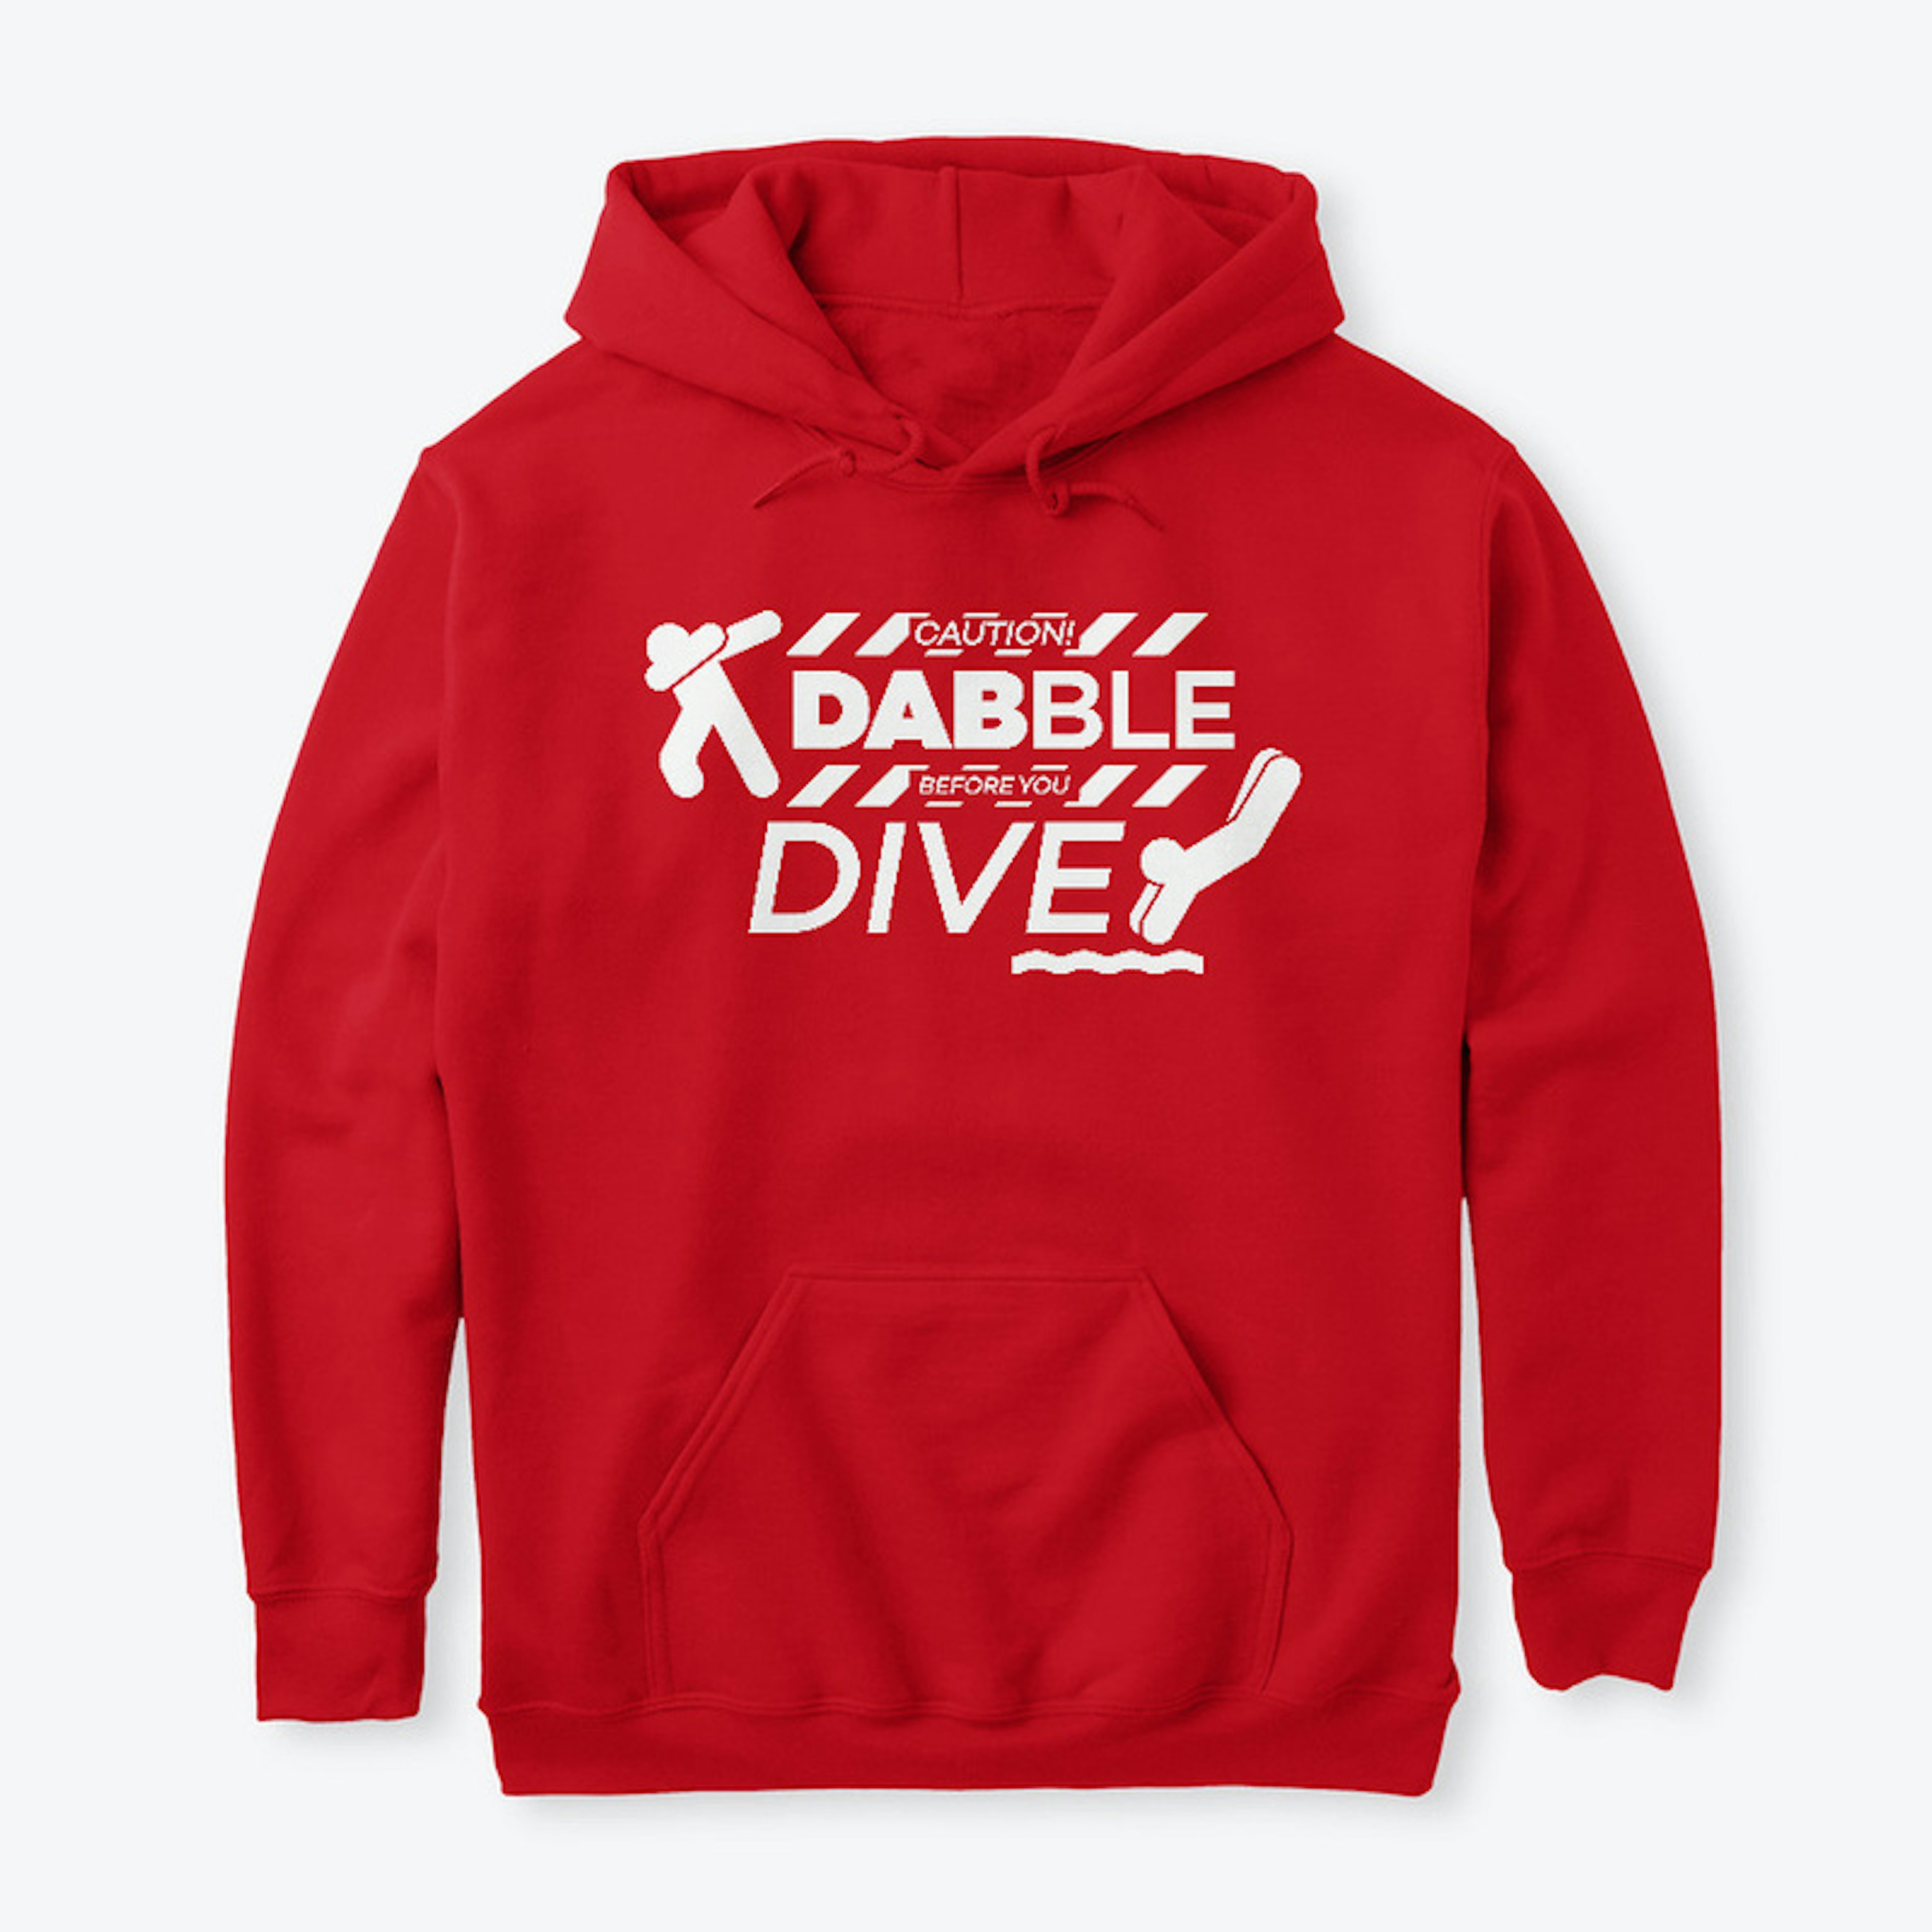 Dabble before you Dive